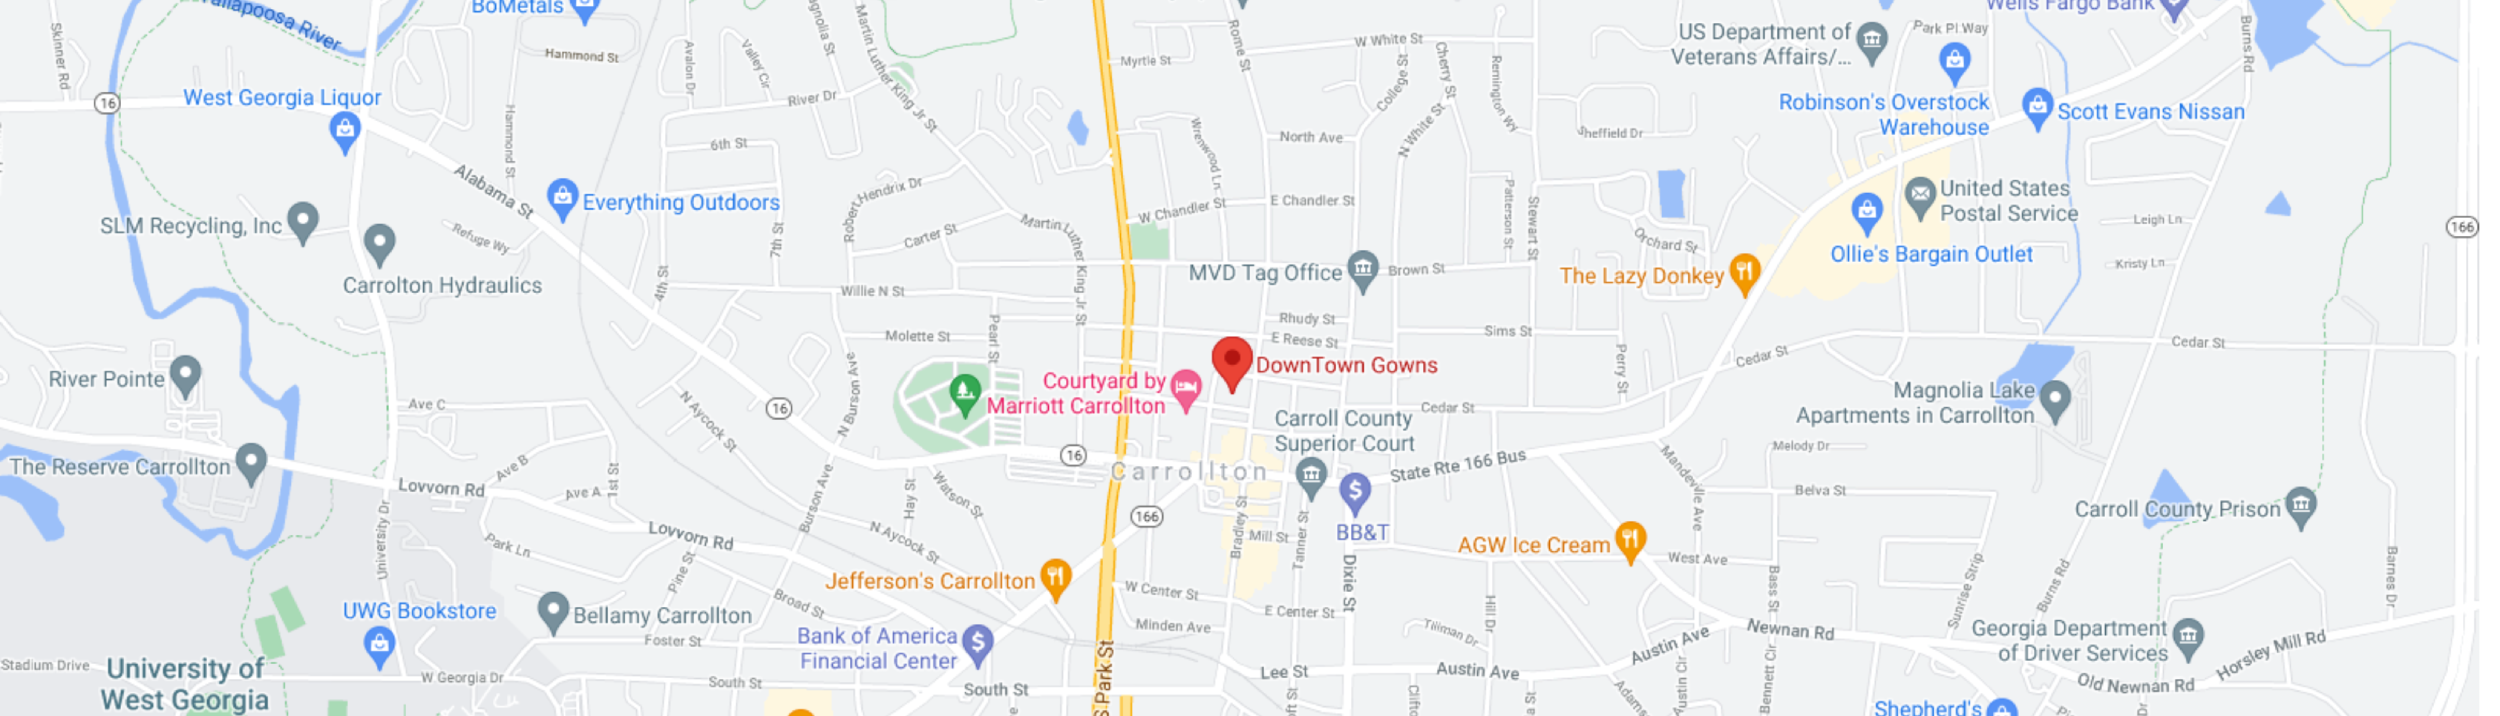 DownTown Gowns location